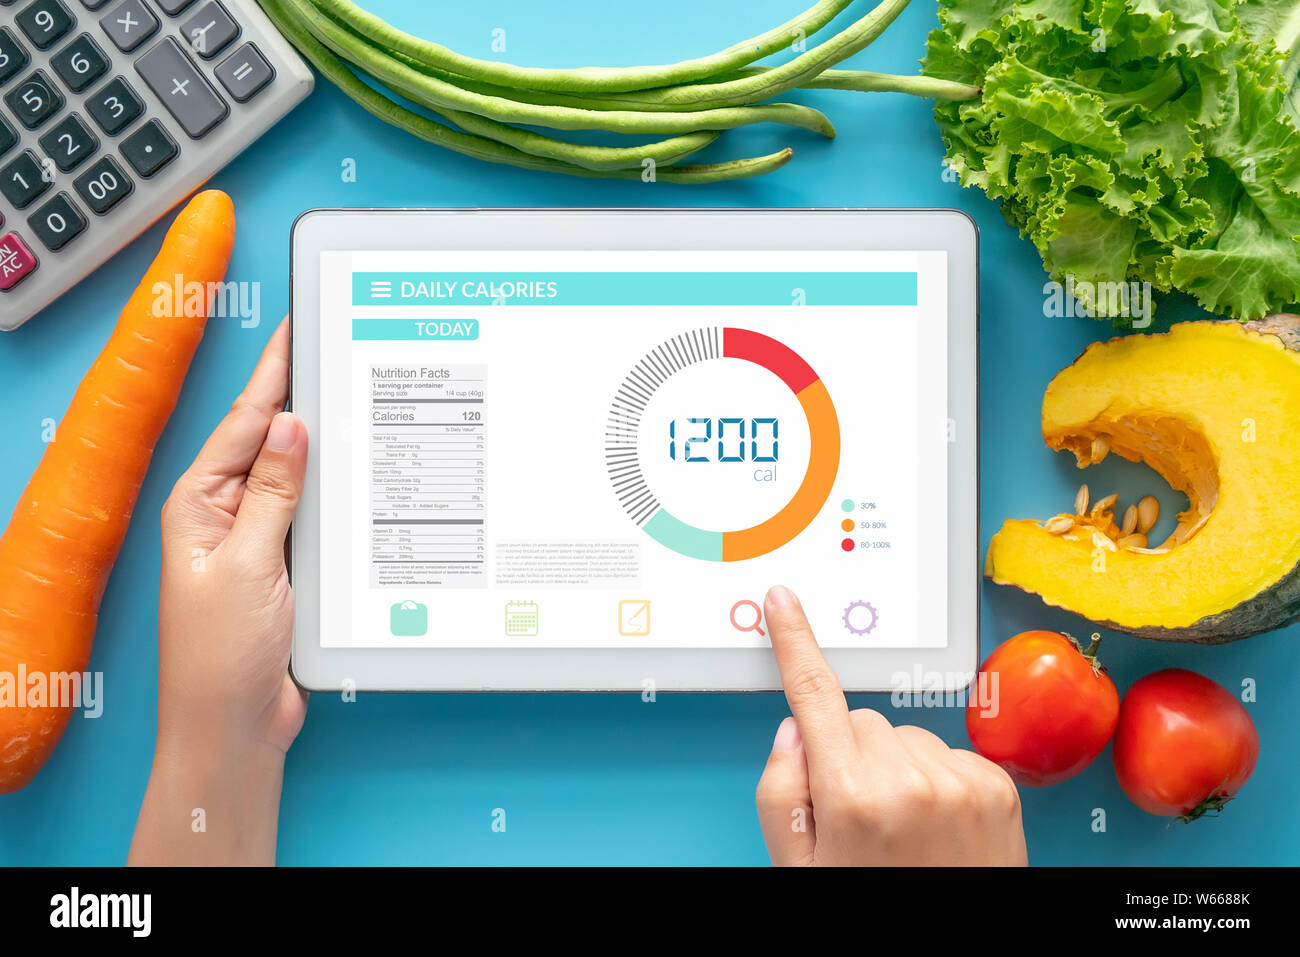 https://c8.alamy.com/comp/W6688K/calories-counting-diet-food-control-and-weight-loss-concept-woman-using-calorie-counter-application-on-tablet-at-dining-table-with-fresh-vegetabl-W6688K.jpg